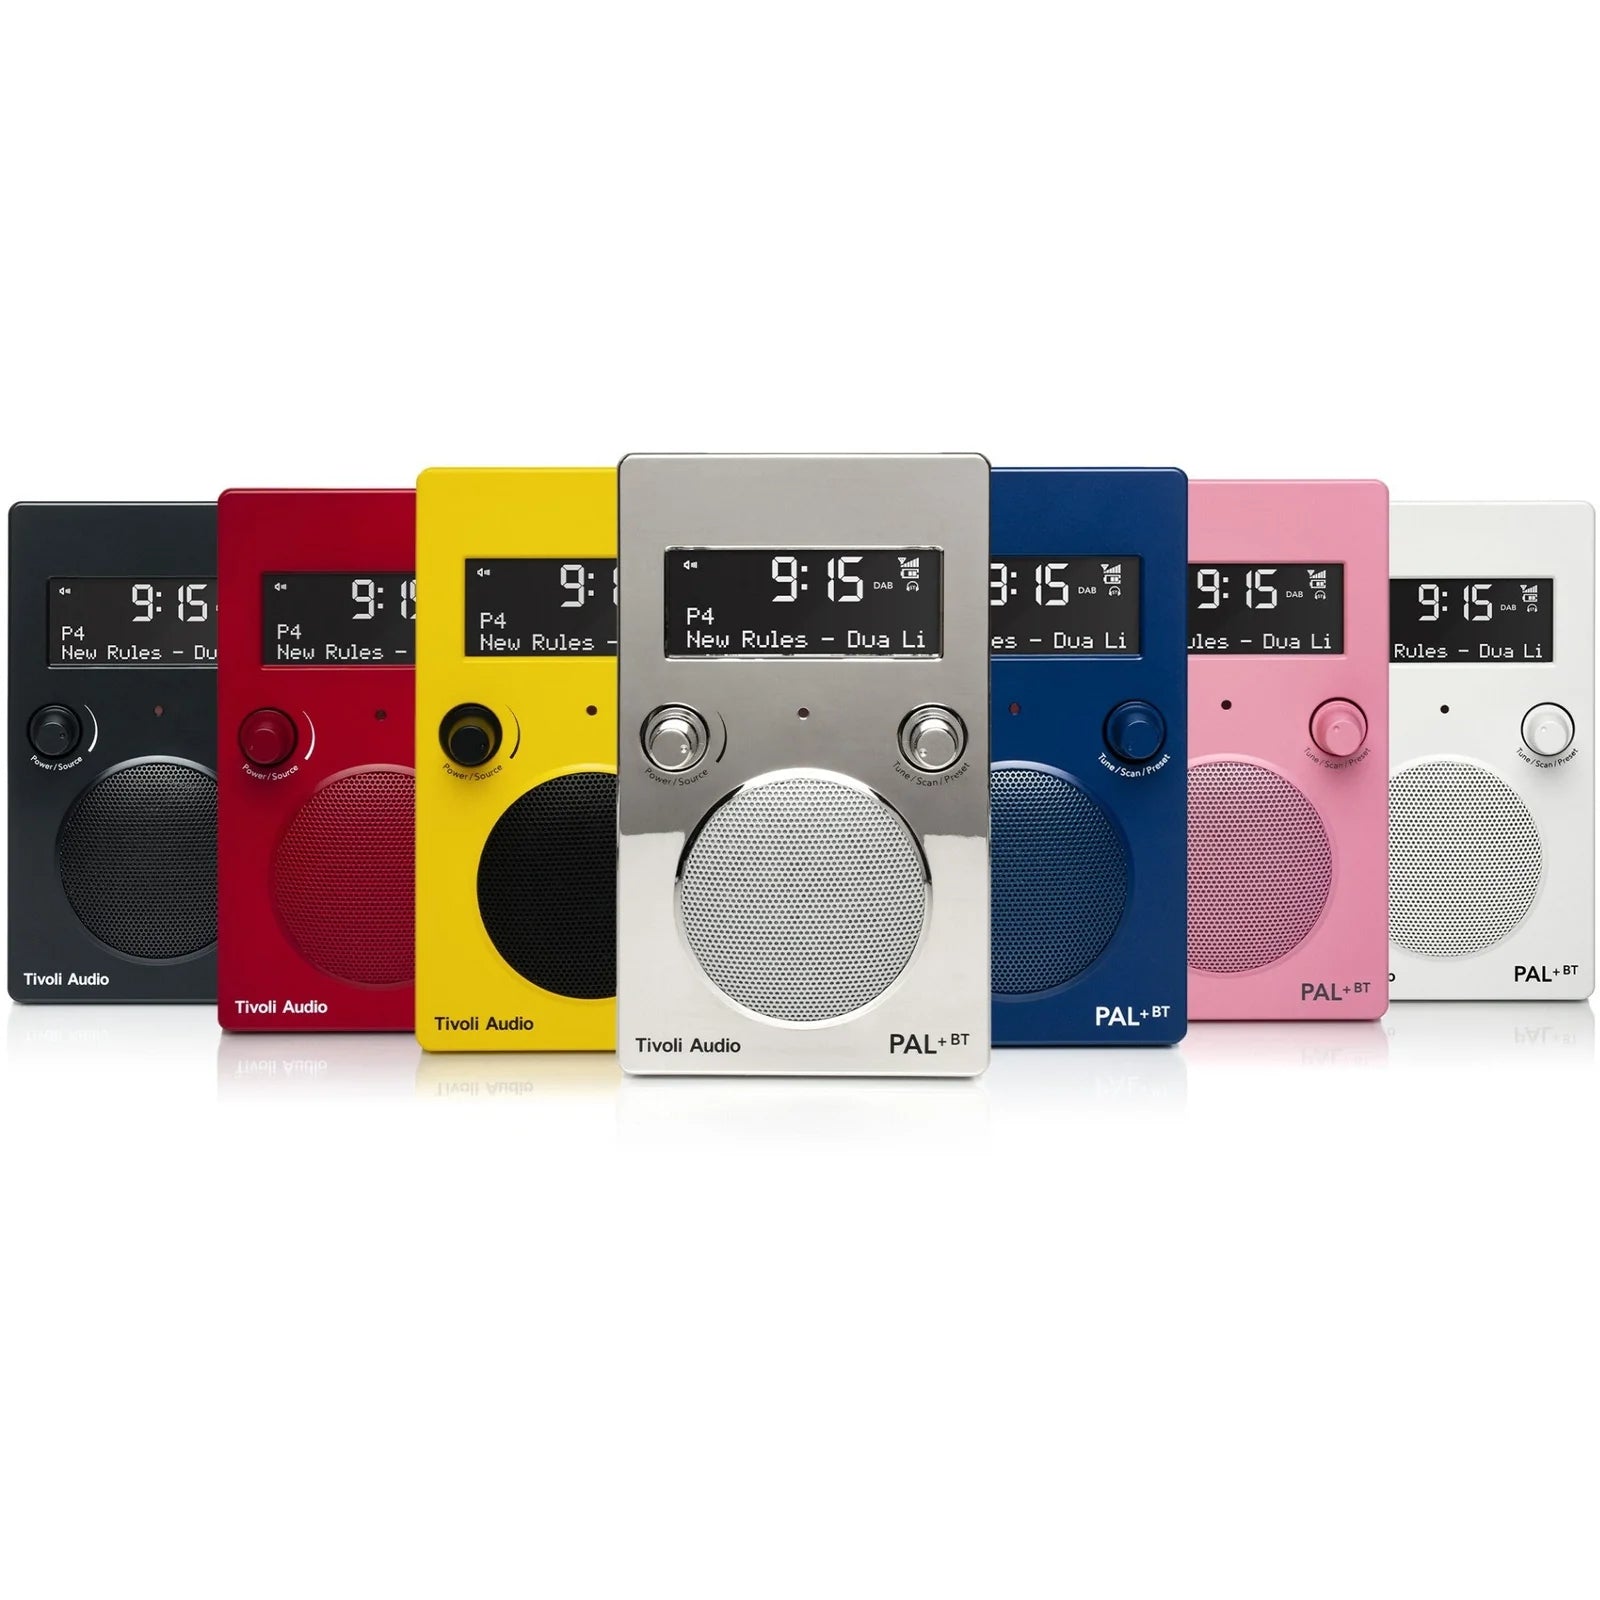 The Tivoli Audio PAL+ BT delivers outstanding sound on the go. Image of full range